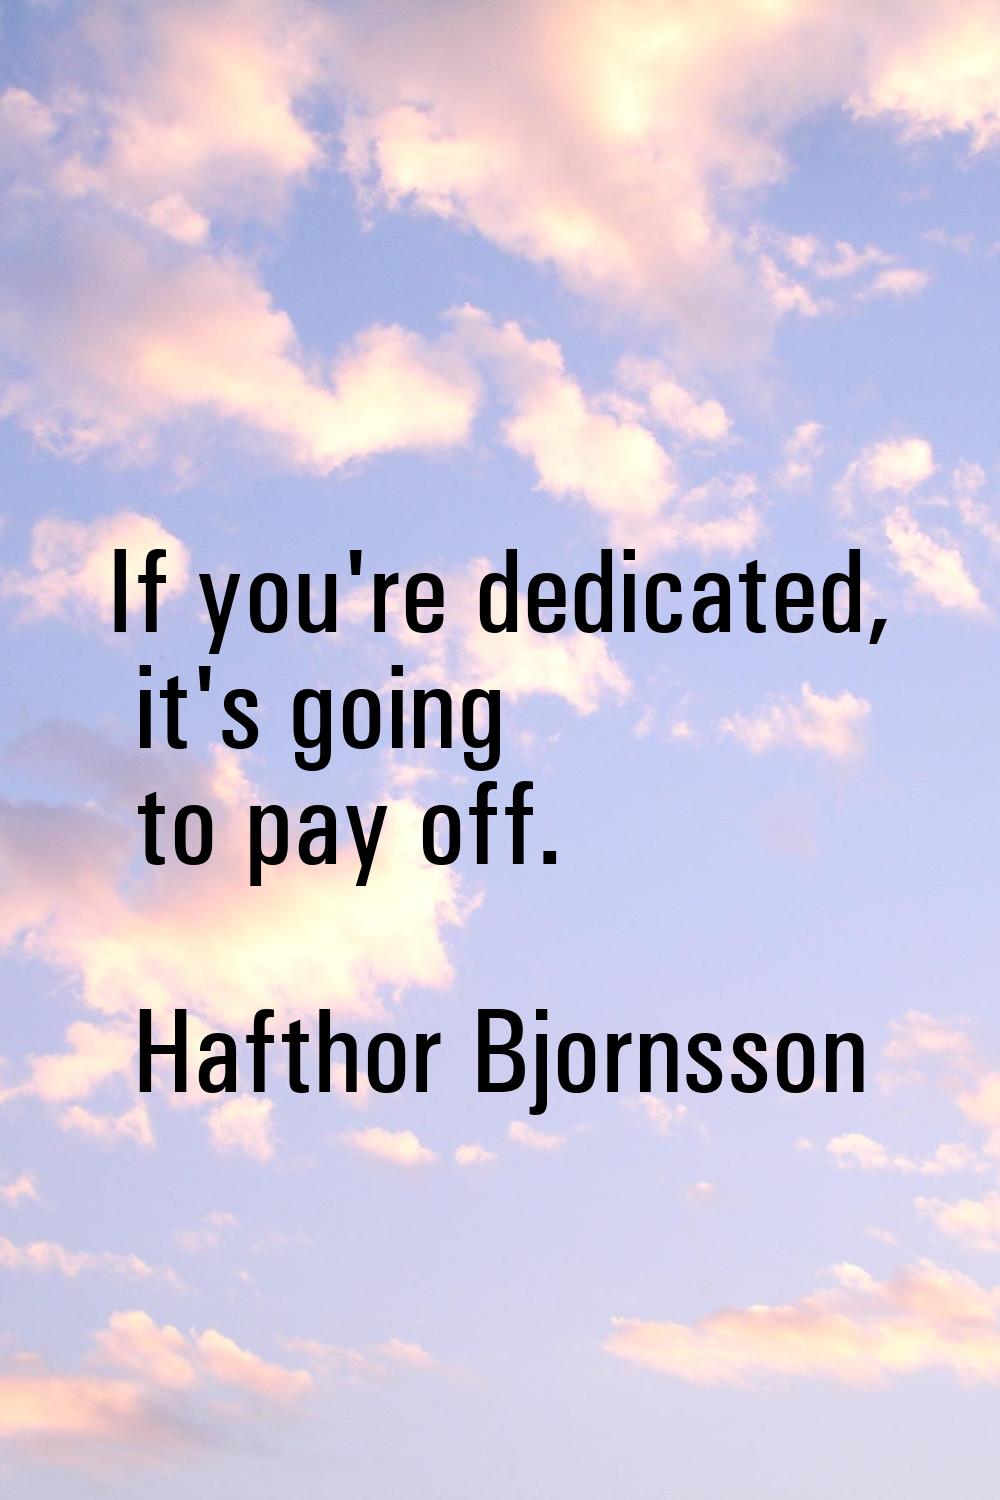 If you're dedicated, it's going to pay off.